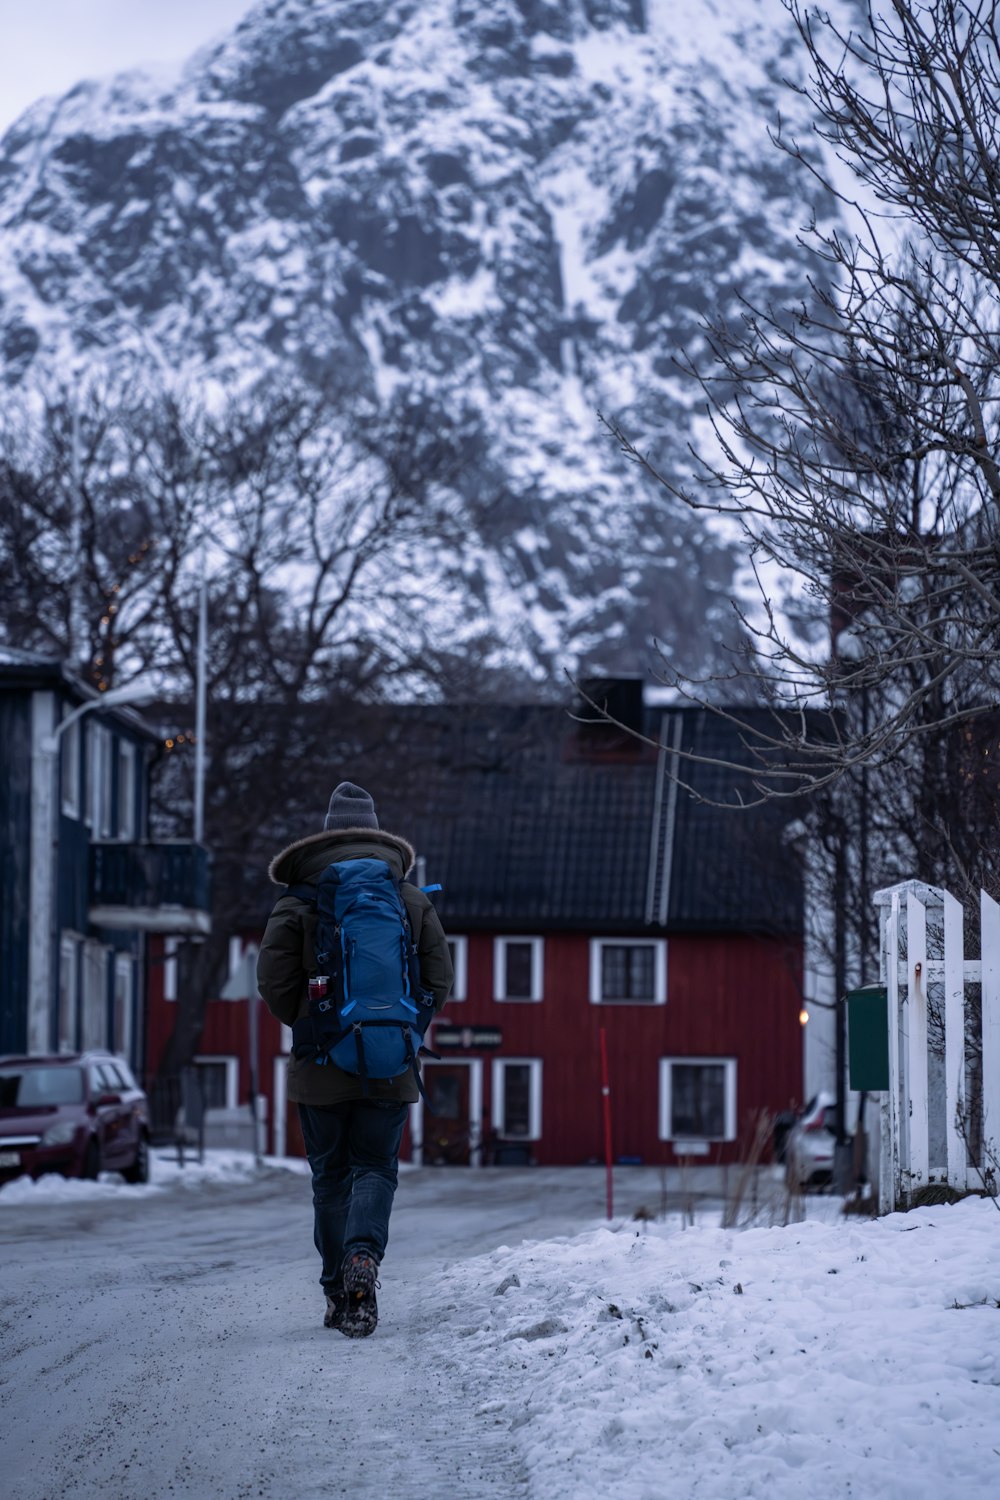 a person with a backpack walking down a snowy street